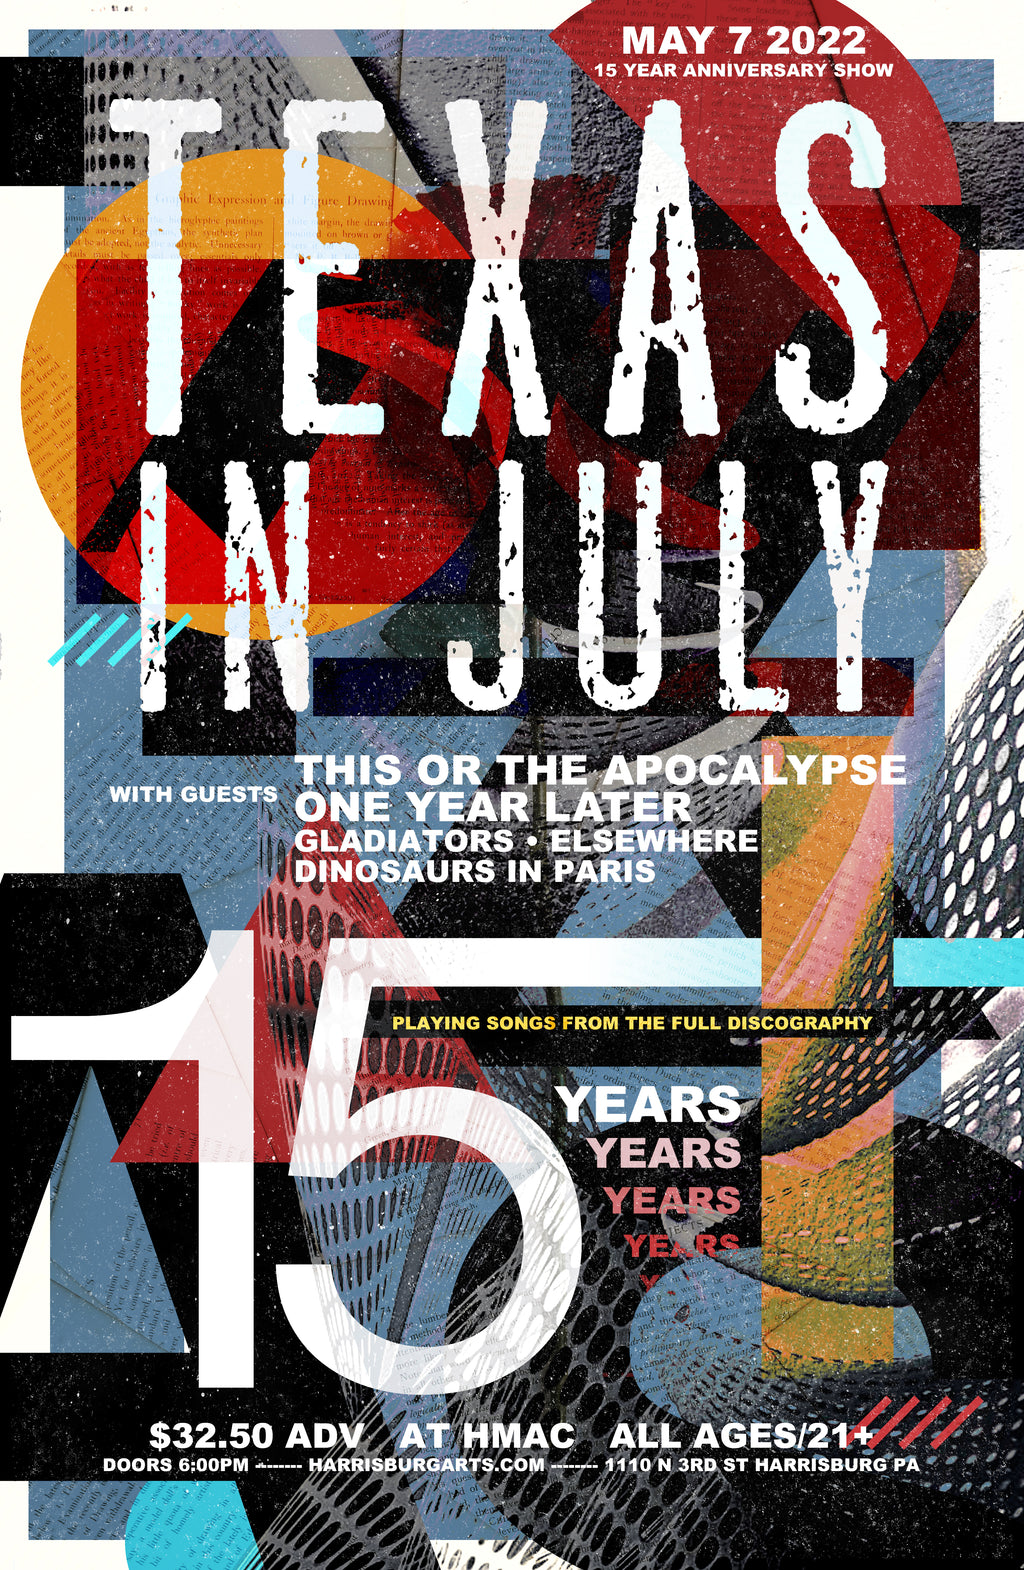 15TH ANNIVERSARY SHOW POSTER